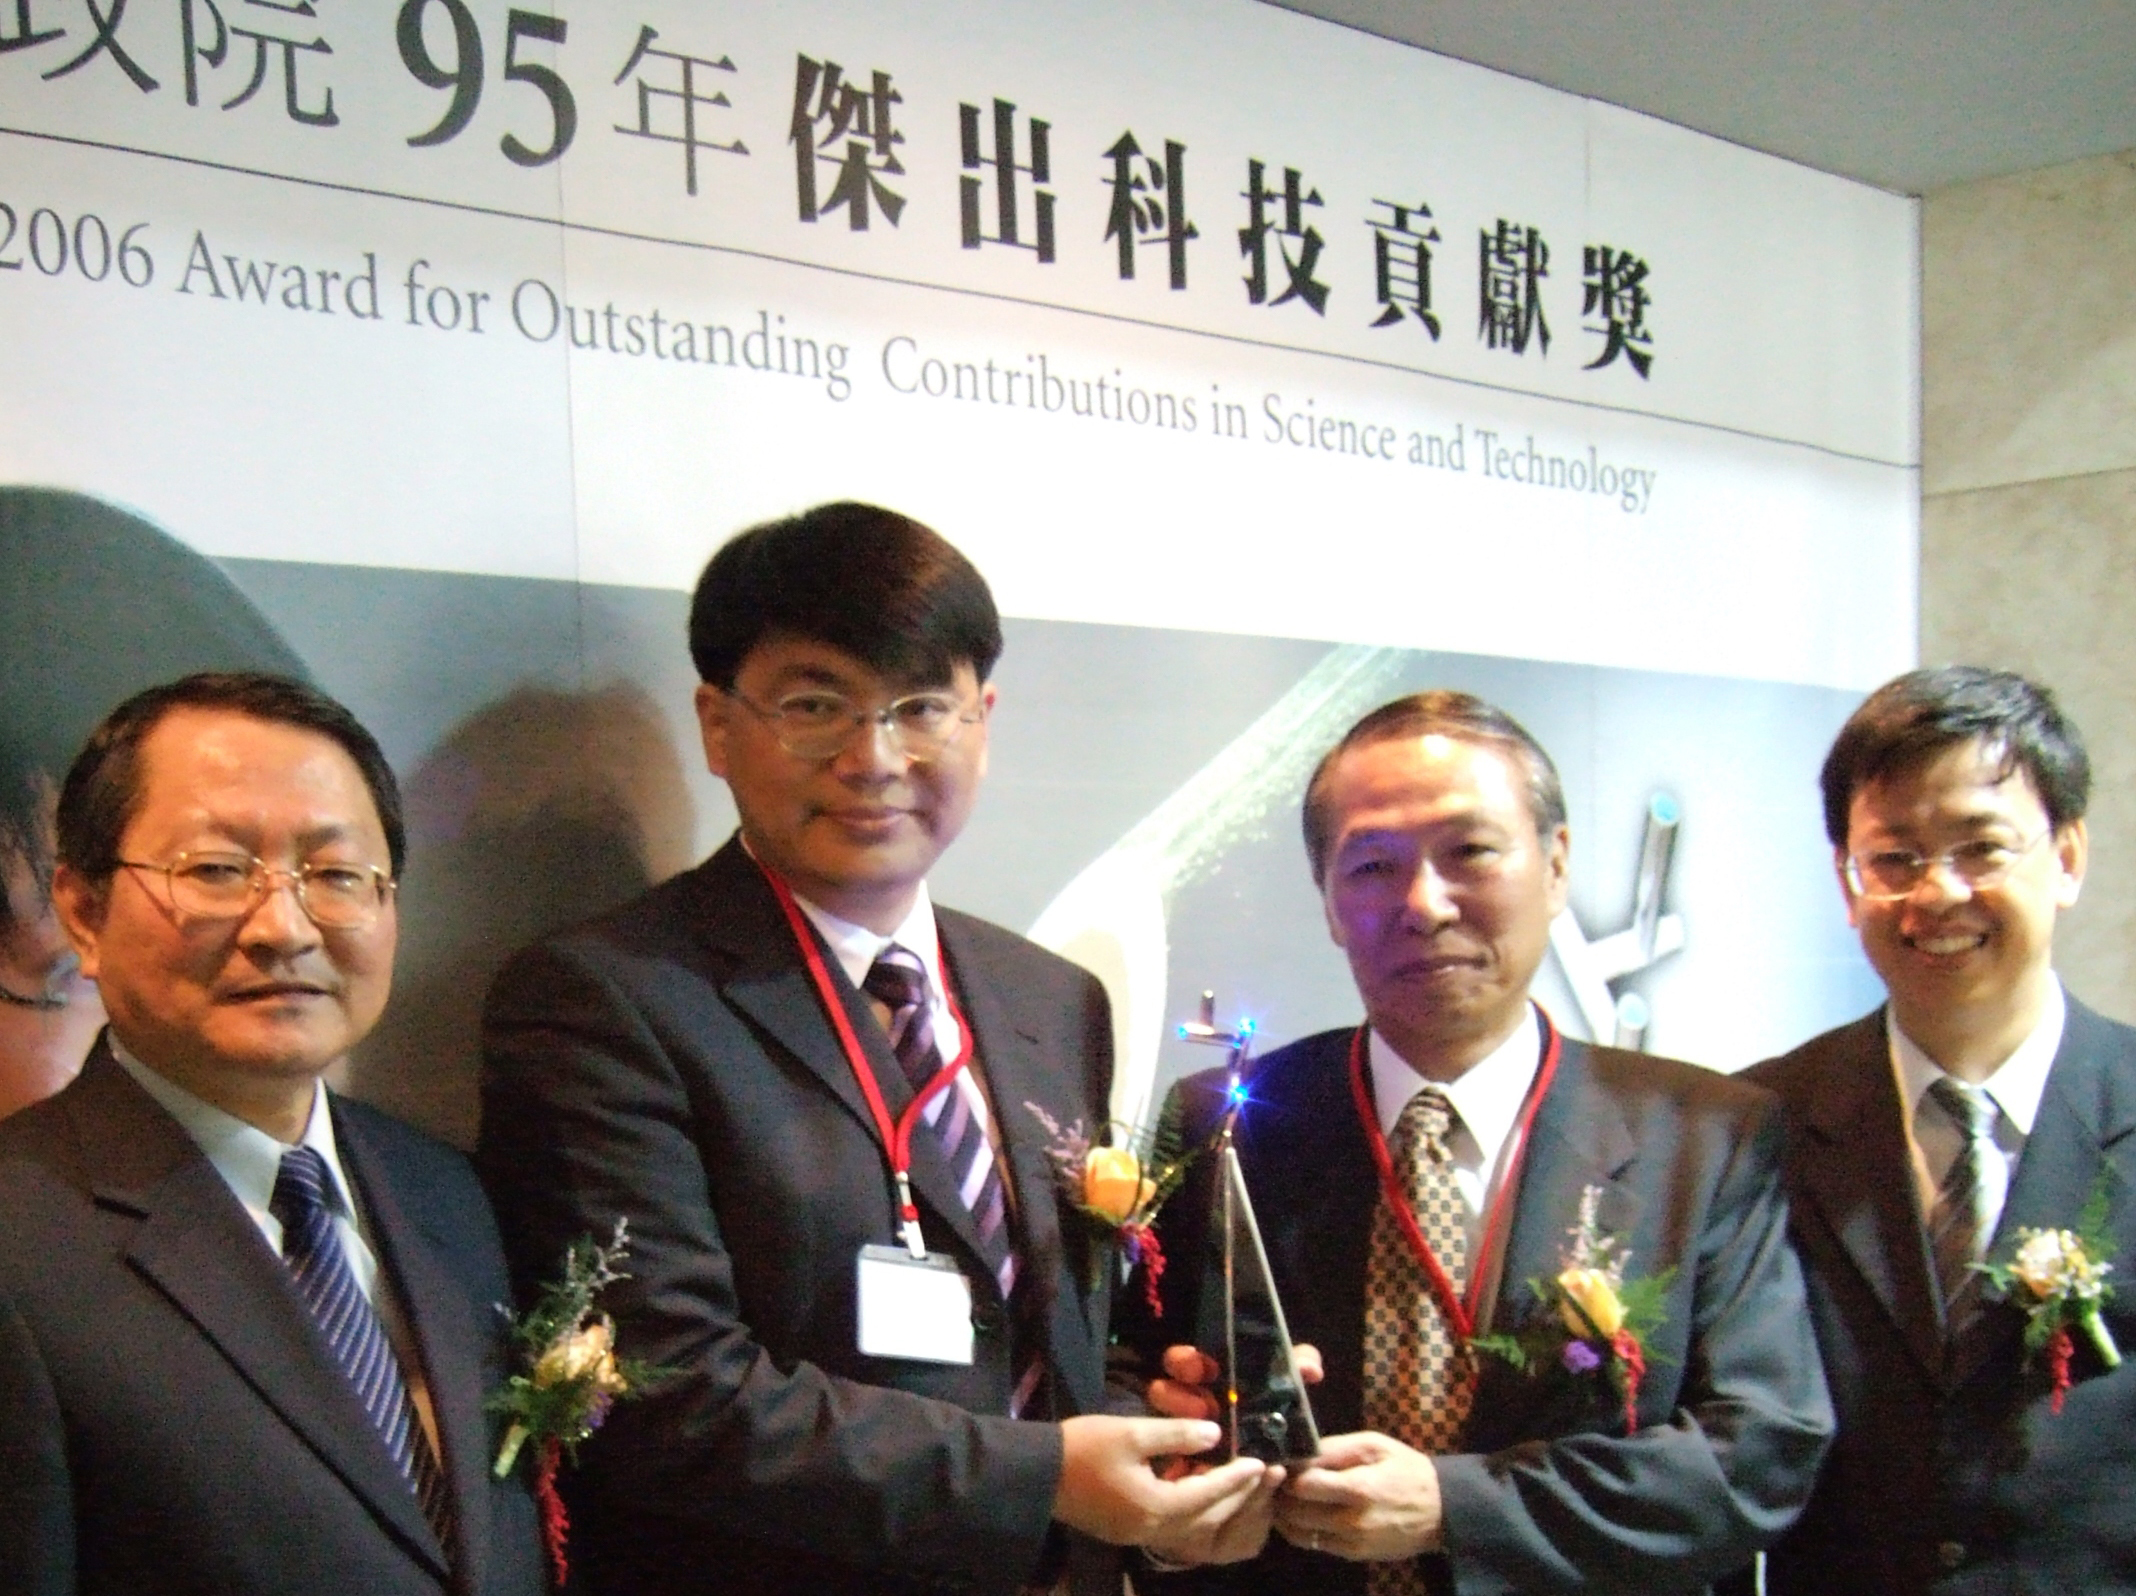 The NCHC's Dr. Fang Pang Lin accepts the Executive Yuan's "Outstanding Contributions in Science and Technology"